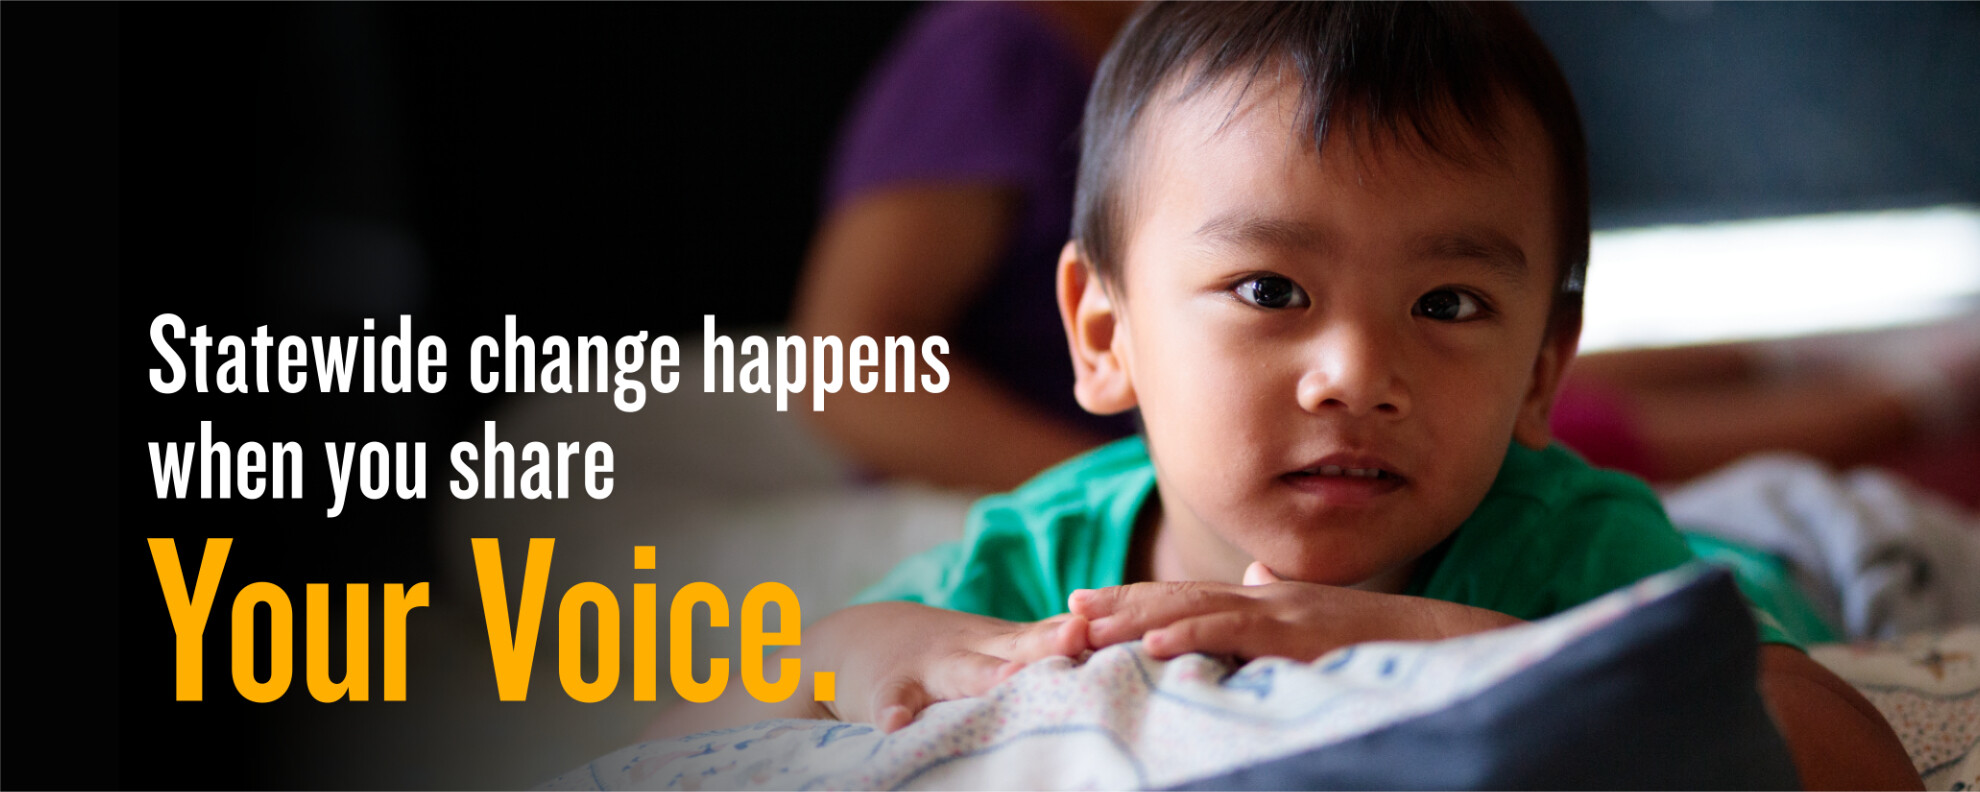 Statewide change happens when you share Yoiur Voice.